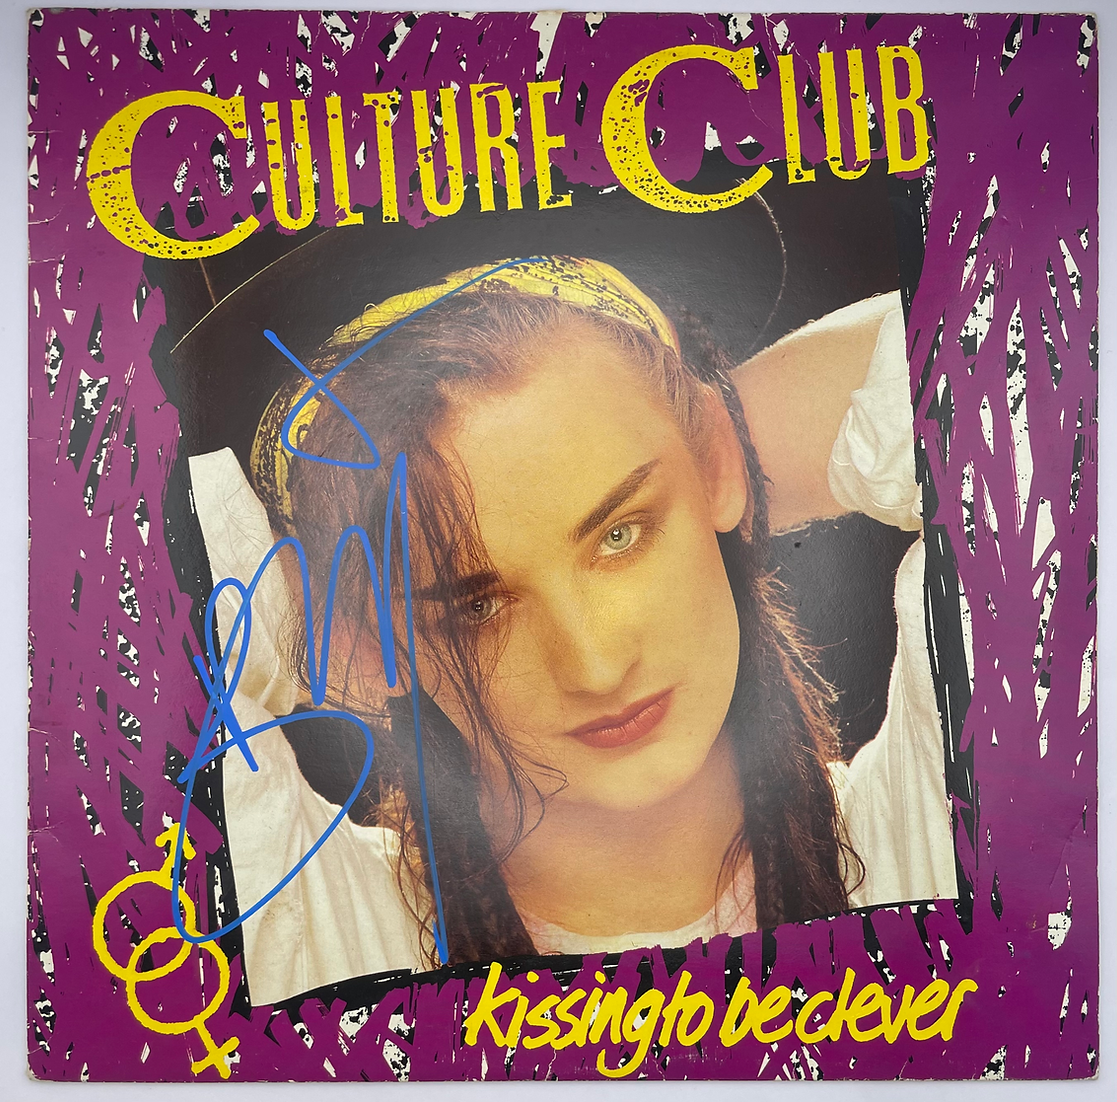 BOY GEORGE SIGNED CULTURE CLUB KISSING TO BE CLEVER VINYL (AFTAL COA) 2